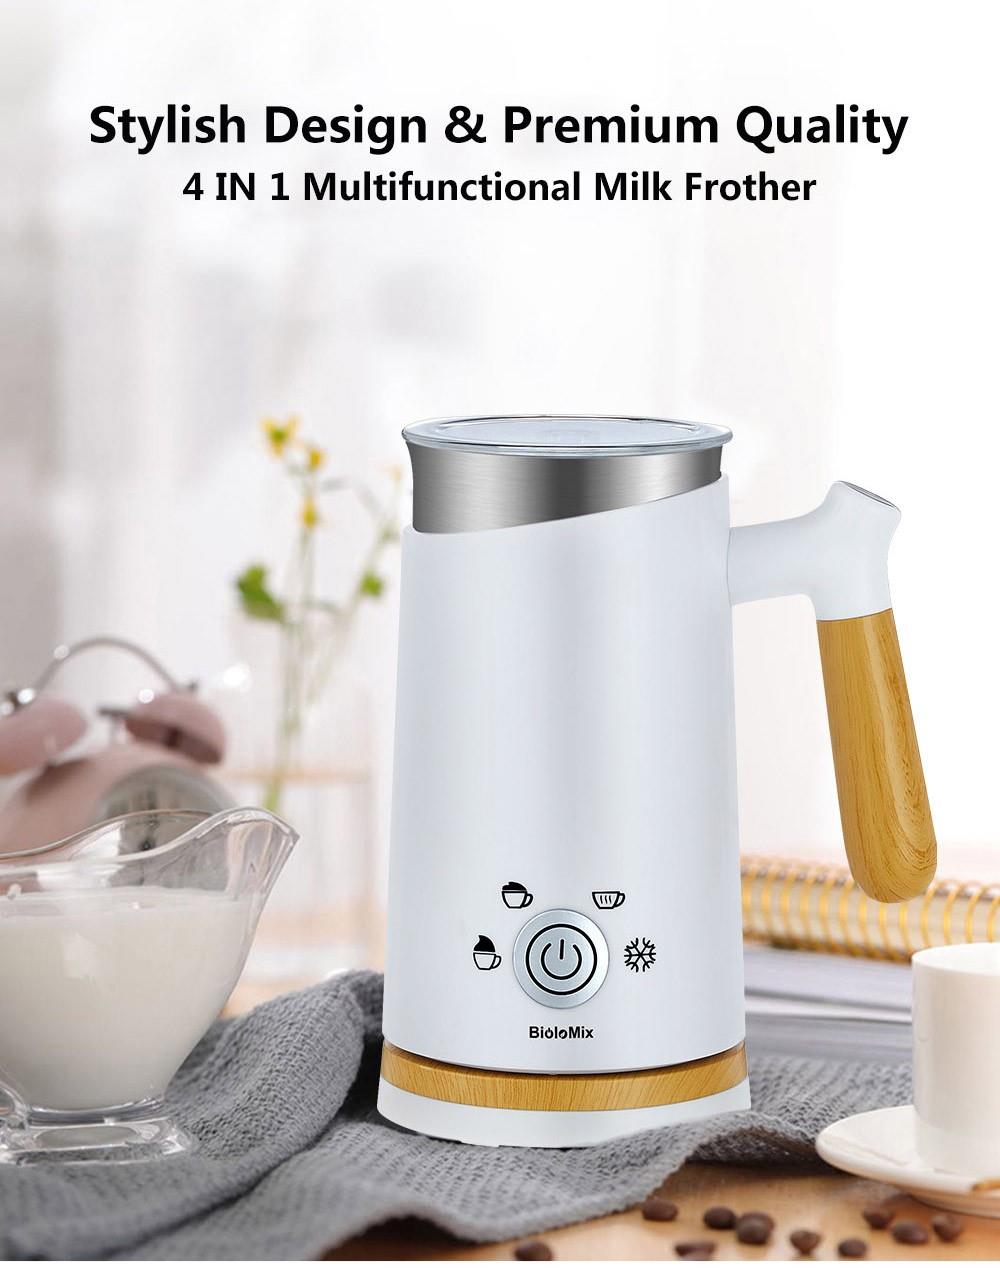 BioloMix Detachable Milk Frother and Steamer, 5-in-1 Automatic Hot